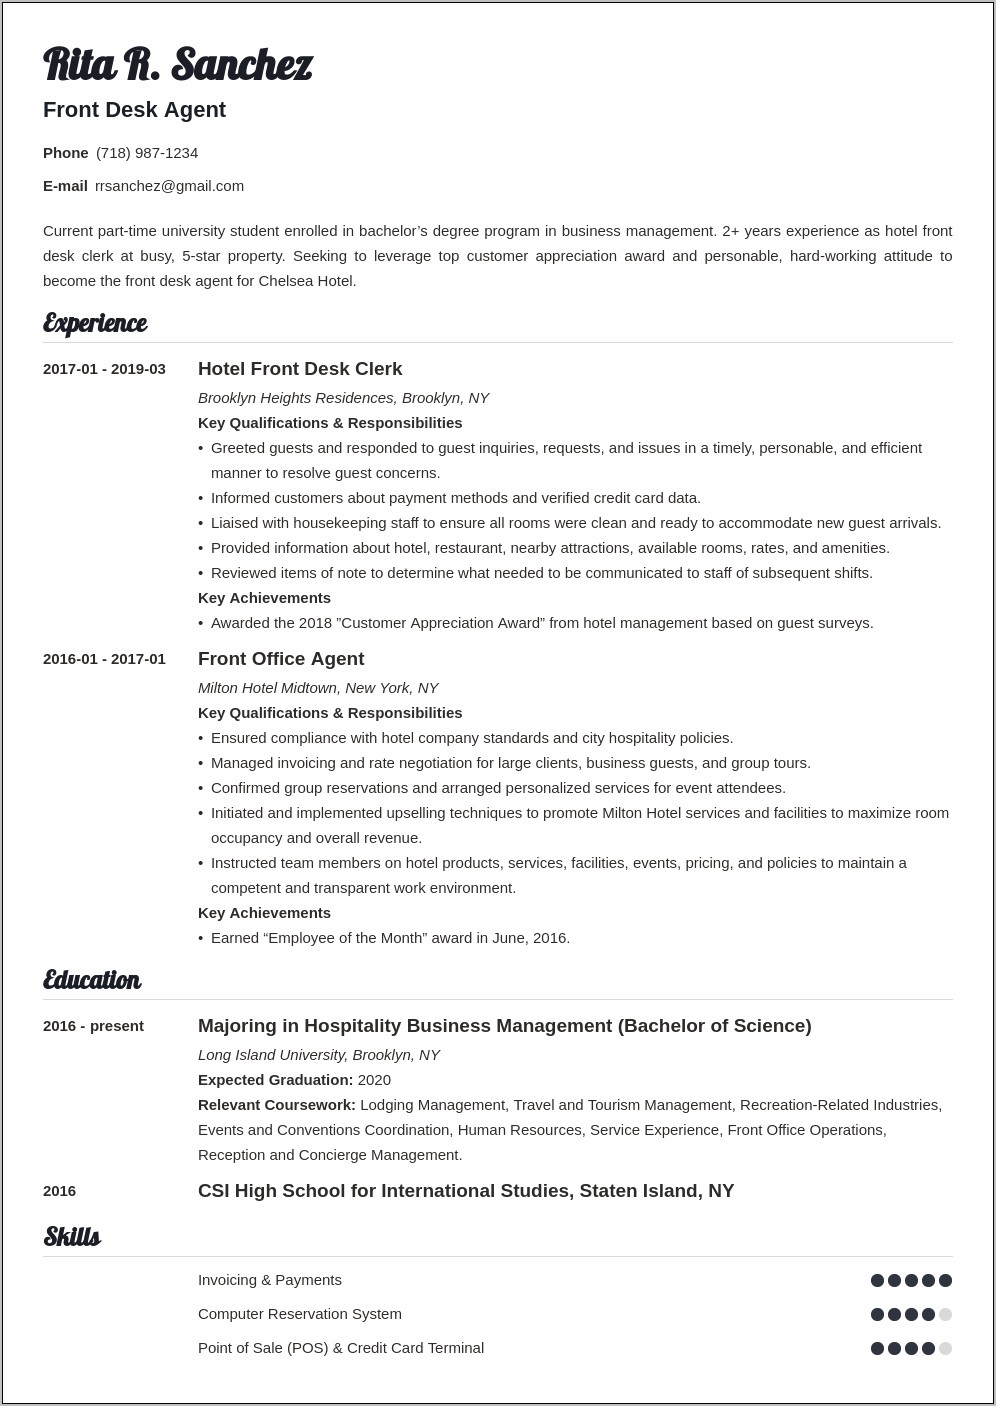 Front Office Manager Skills Resume